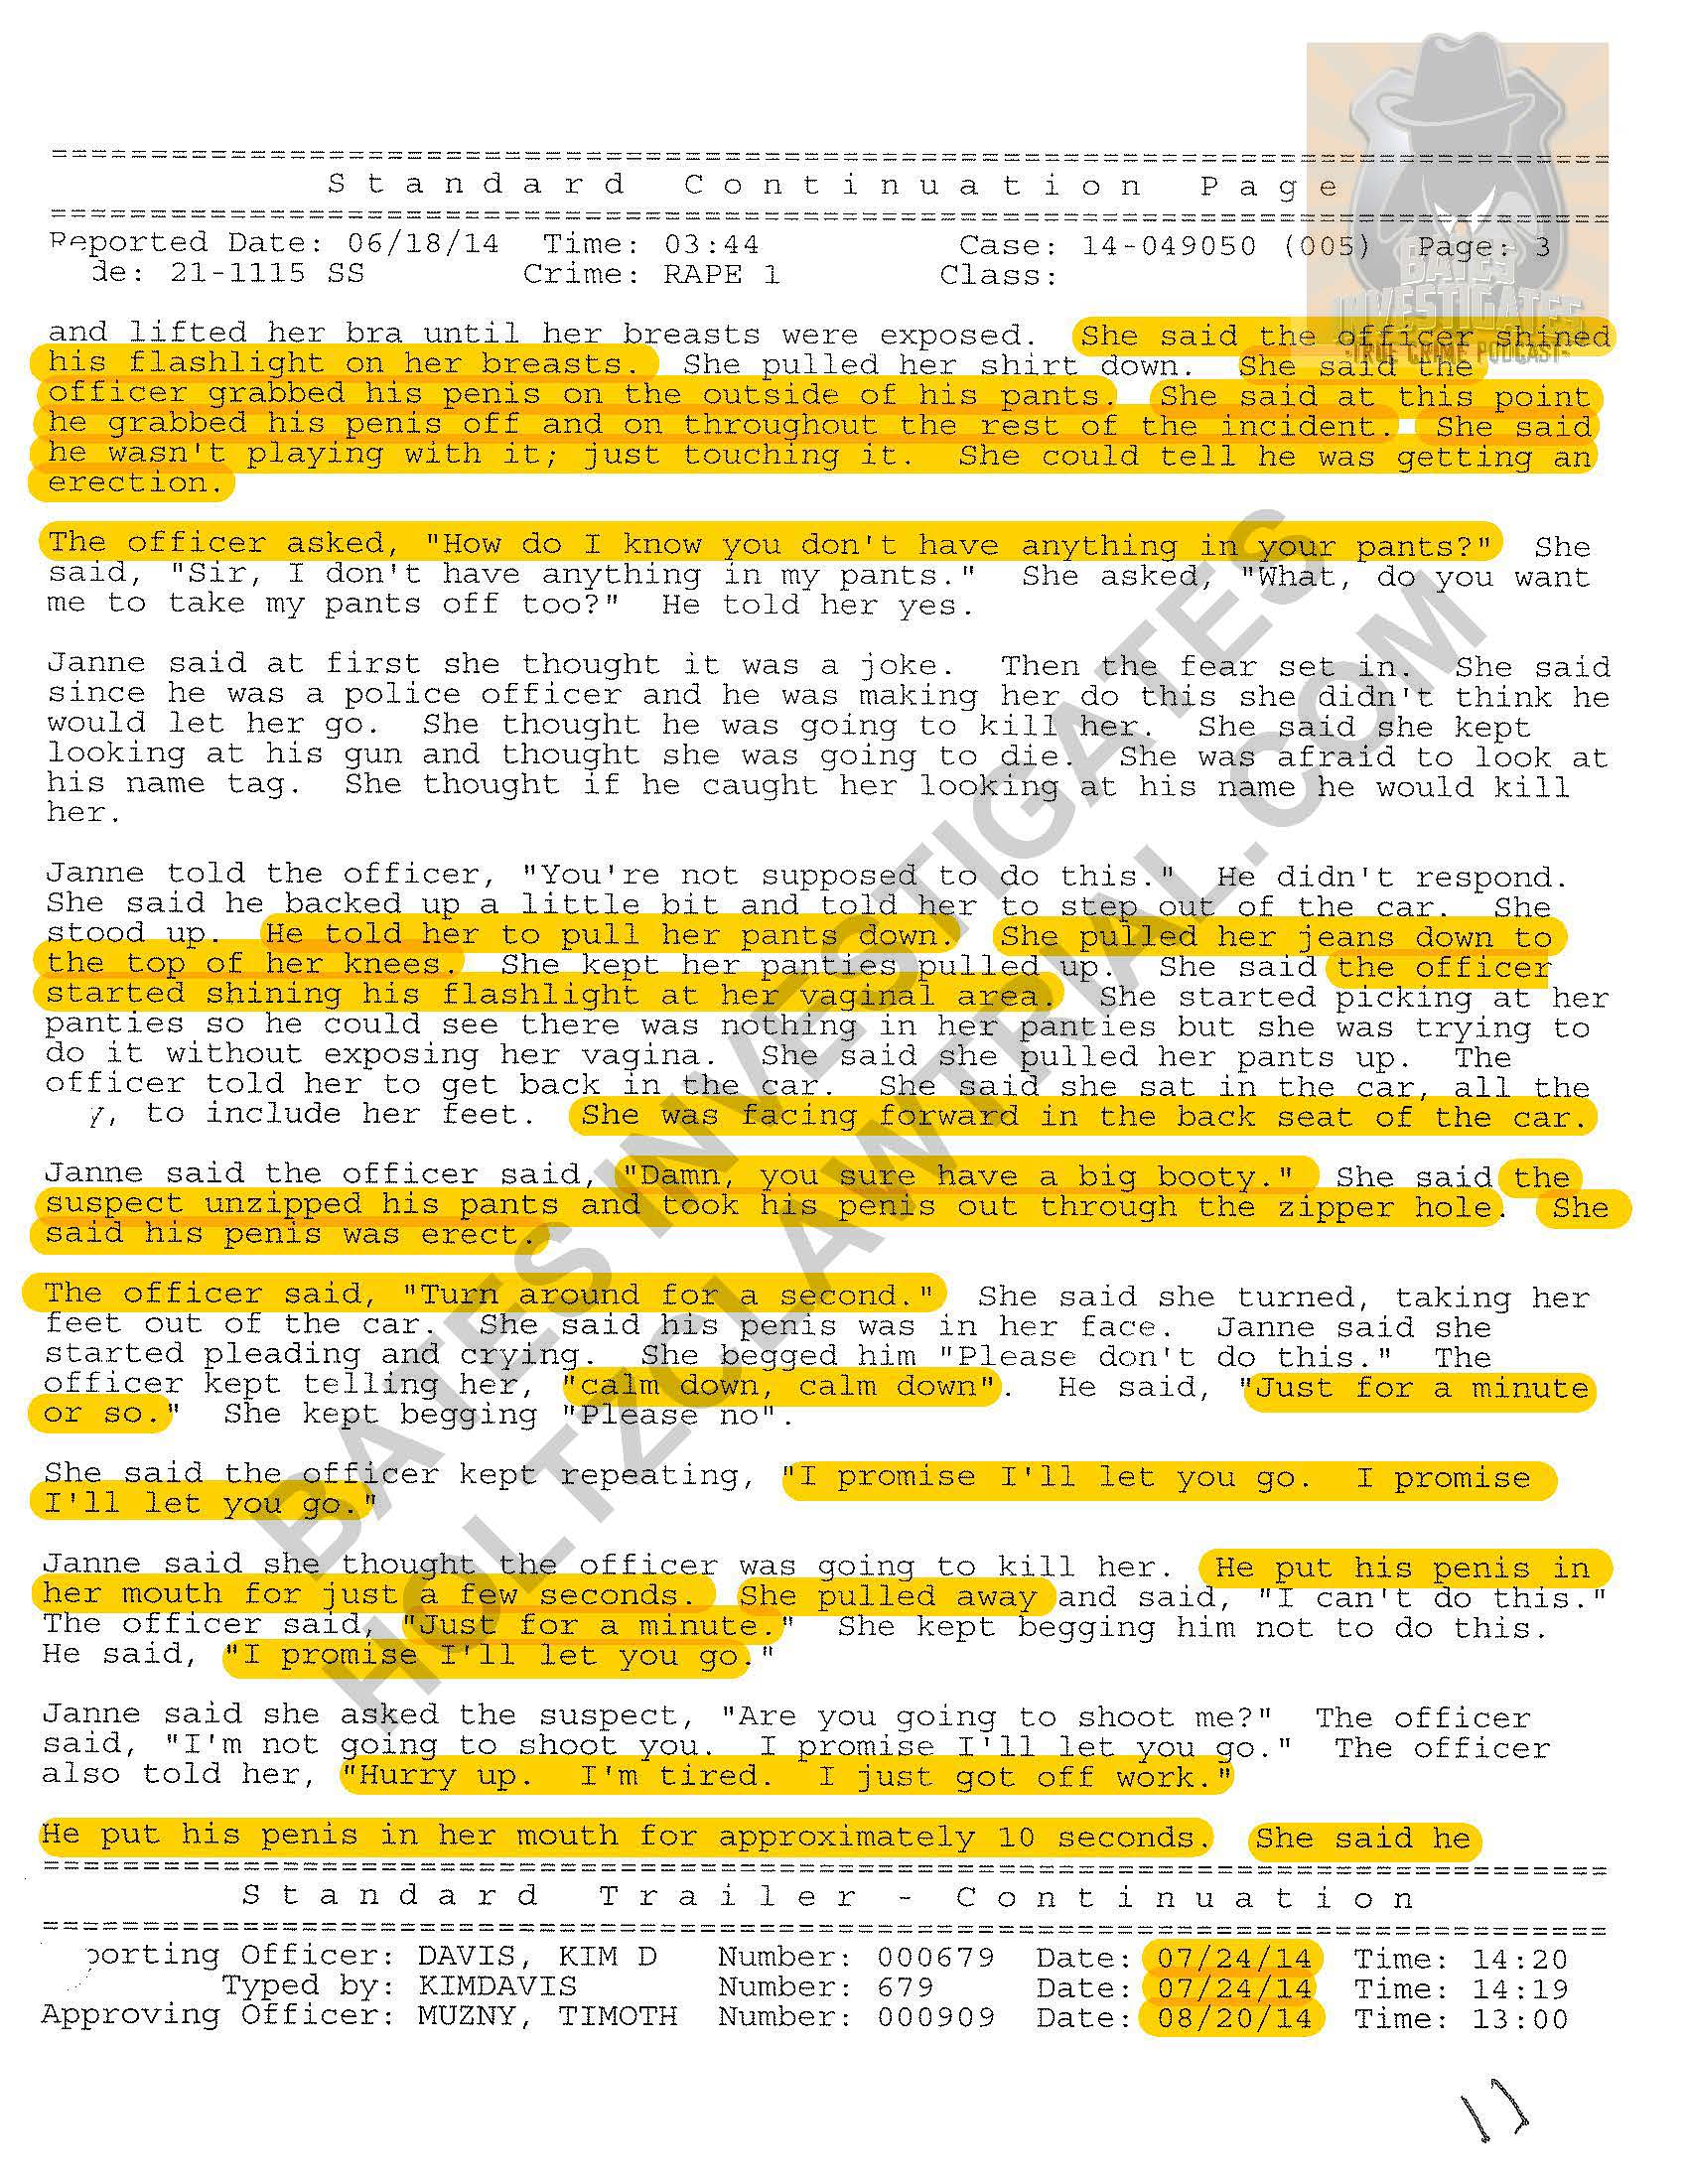 Holtzclaw - Ep02 - Police Reports Watermarked_Page_21.jpg